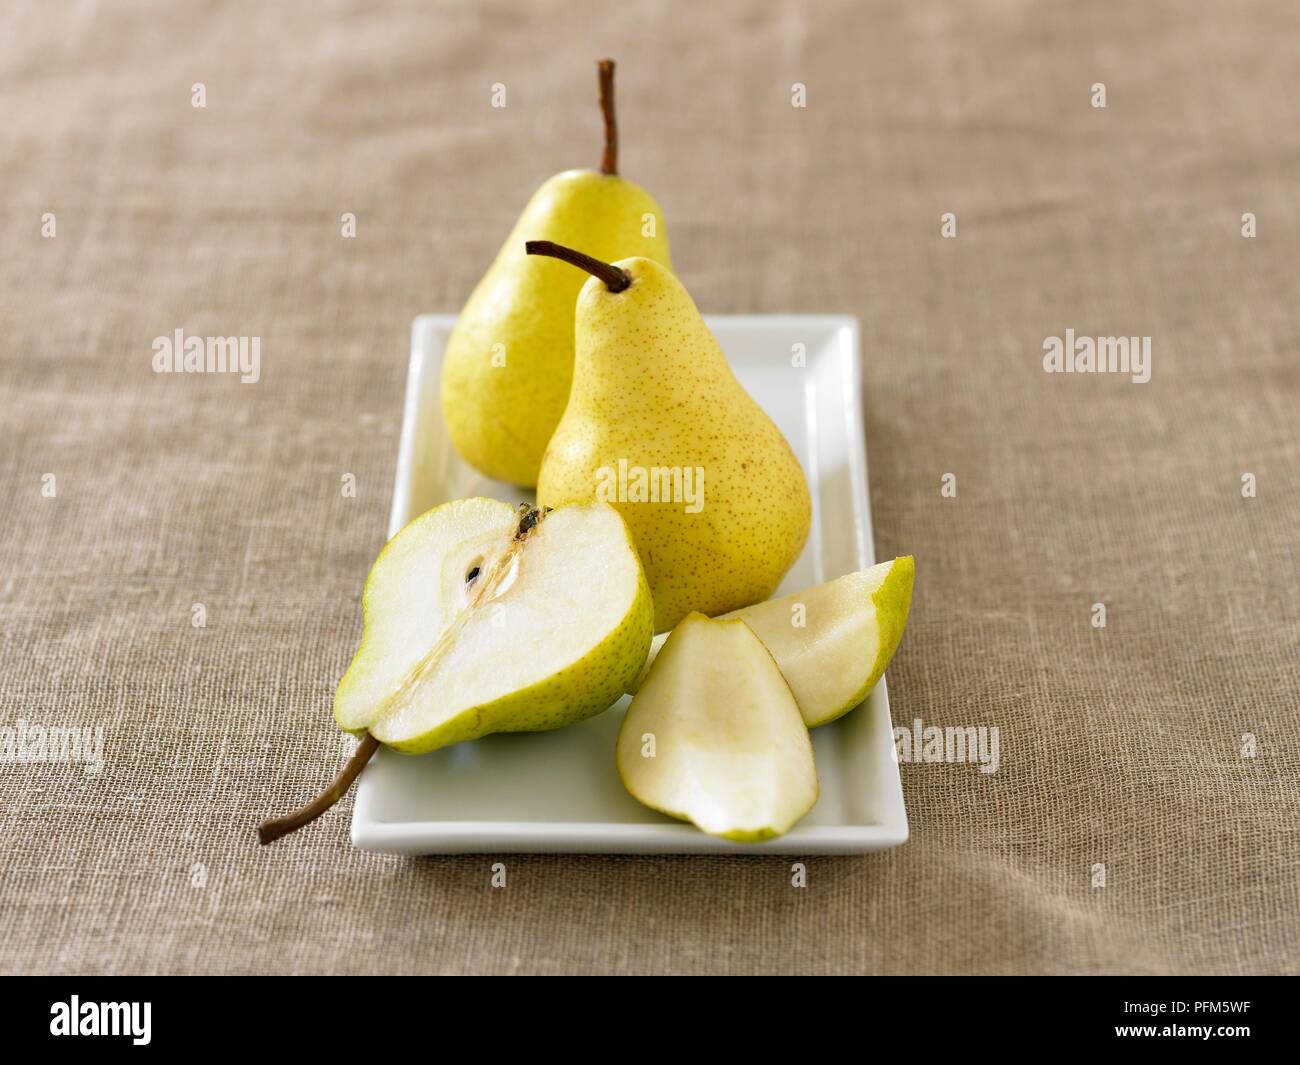 Pears whole and sliced on a rectangular plate Stock Photo